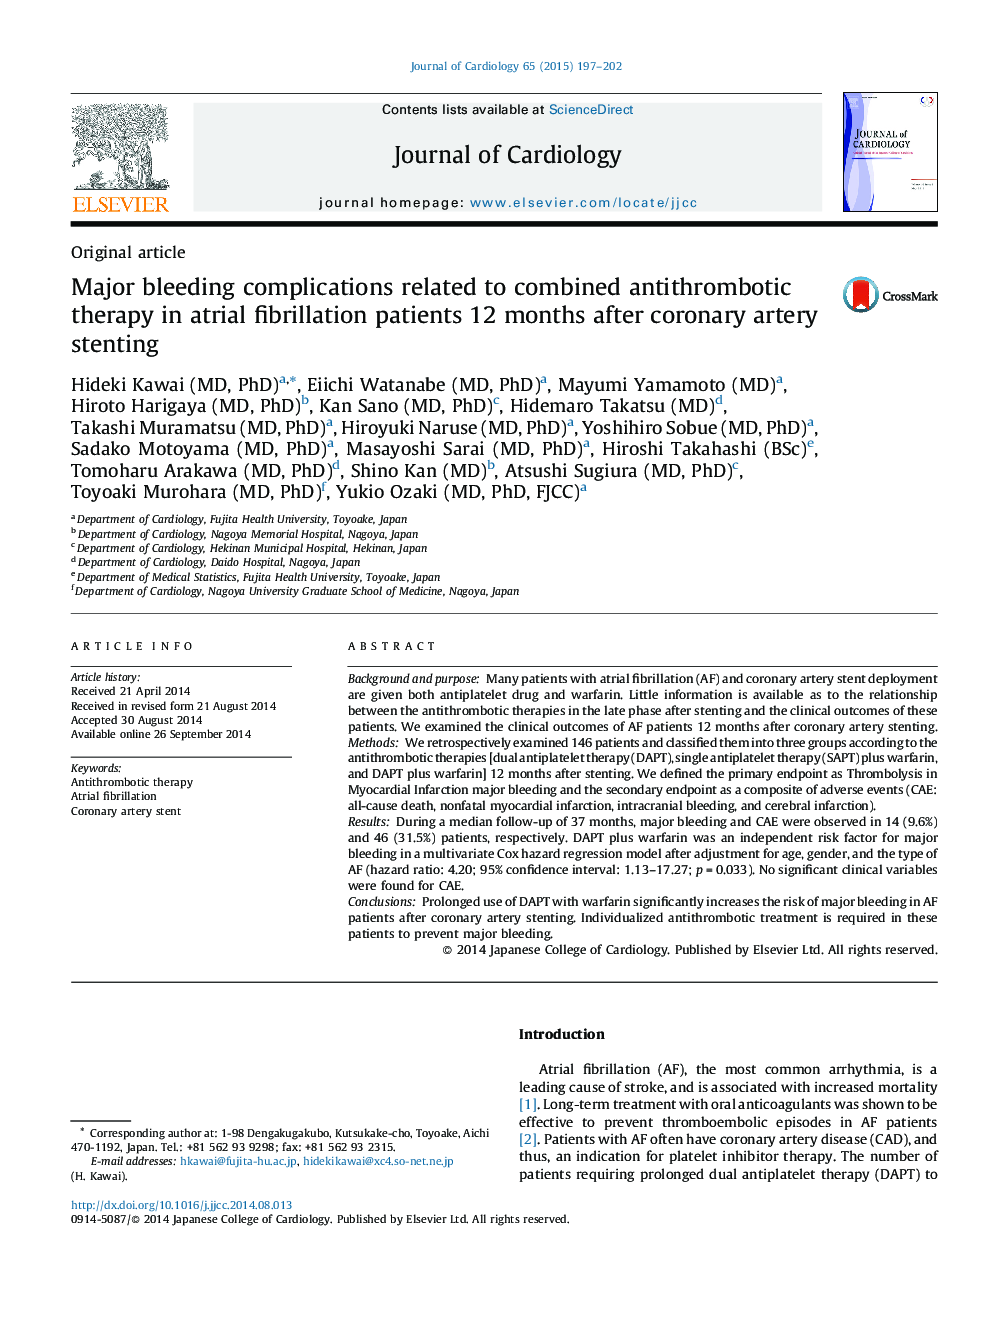 Major bleeding complications related to combined antithrombotic therapy in atrial fibrillation patients 12 months after coronary artery stenting